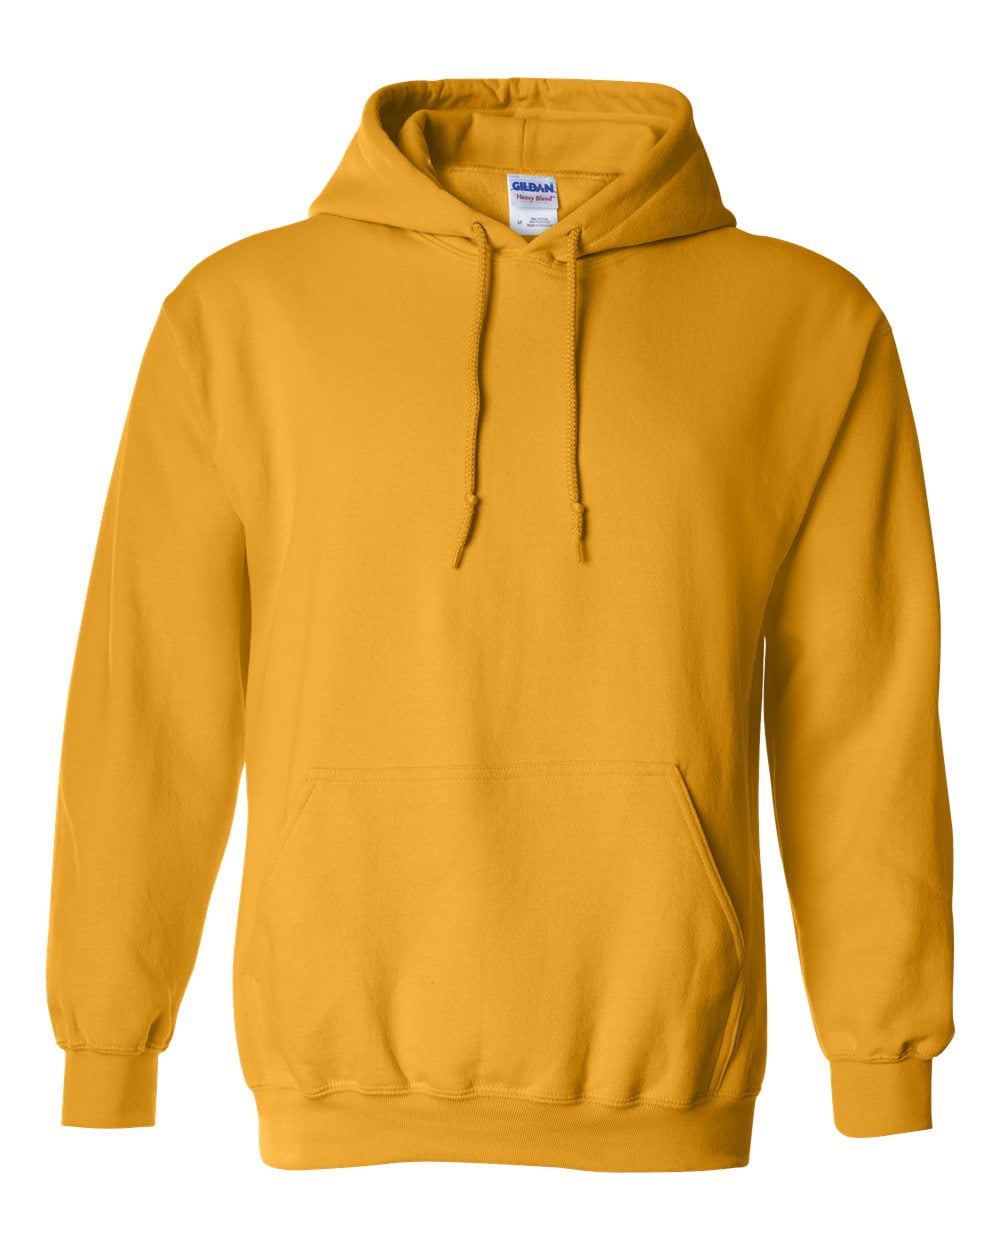 Sizes from Small to 5XL Mens Gildan Hooded Jumper Soft Feel High Quality 